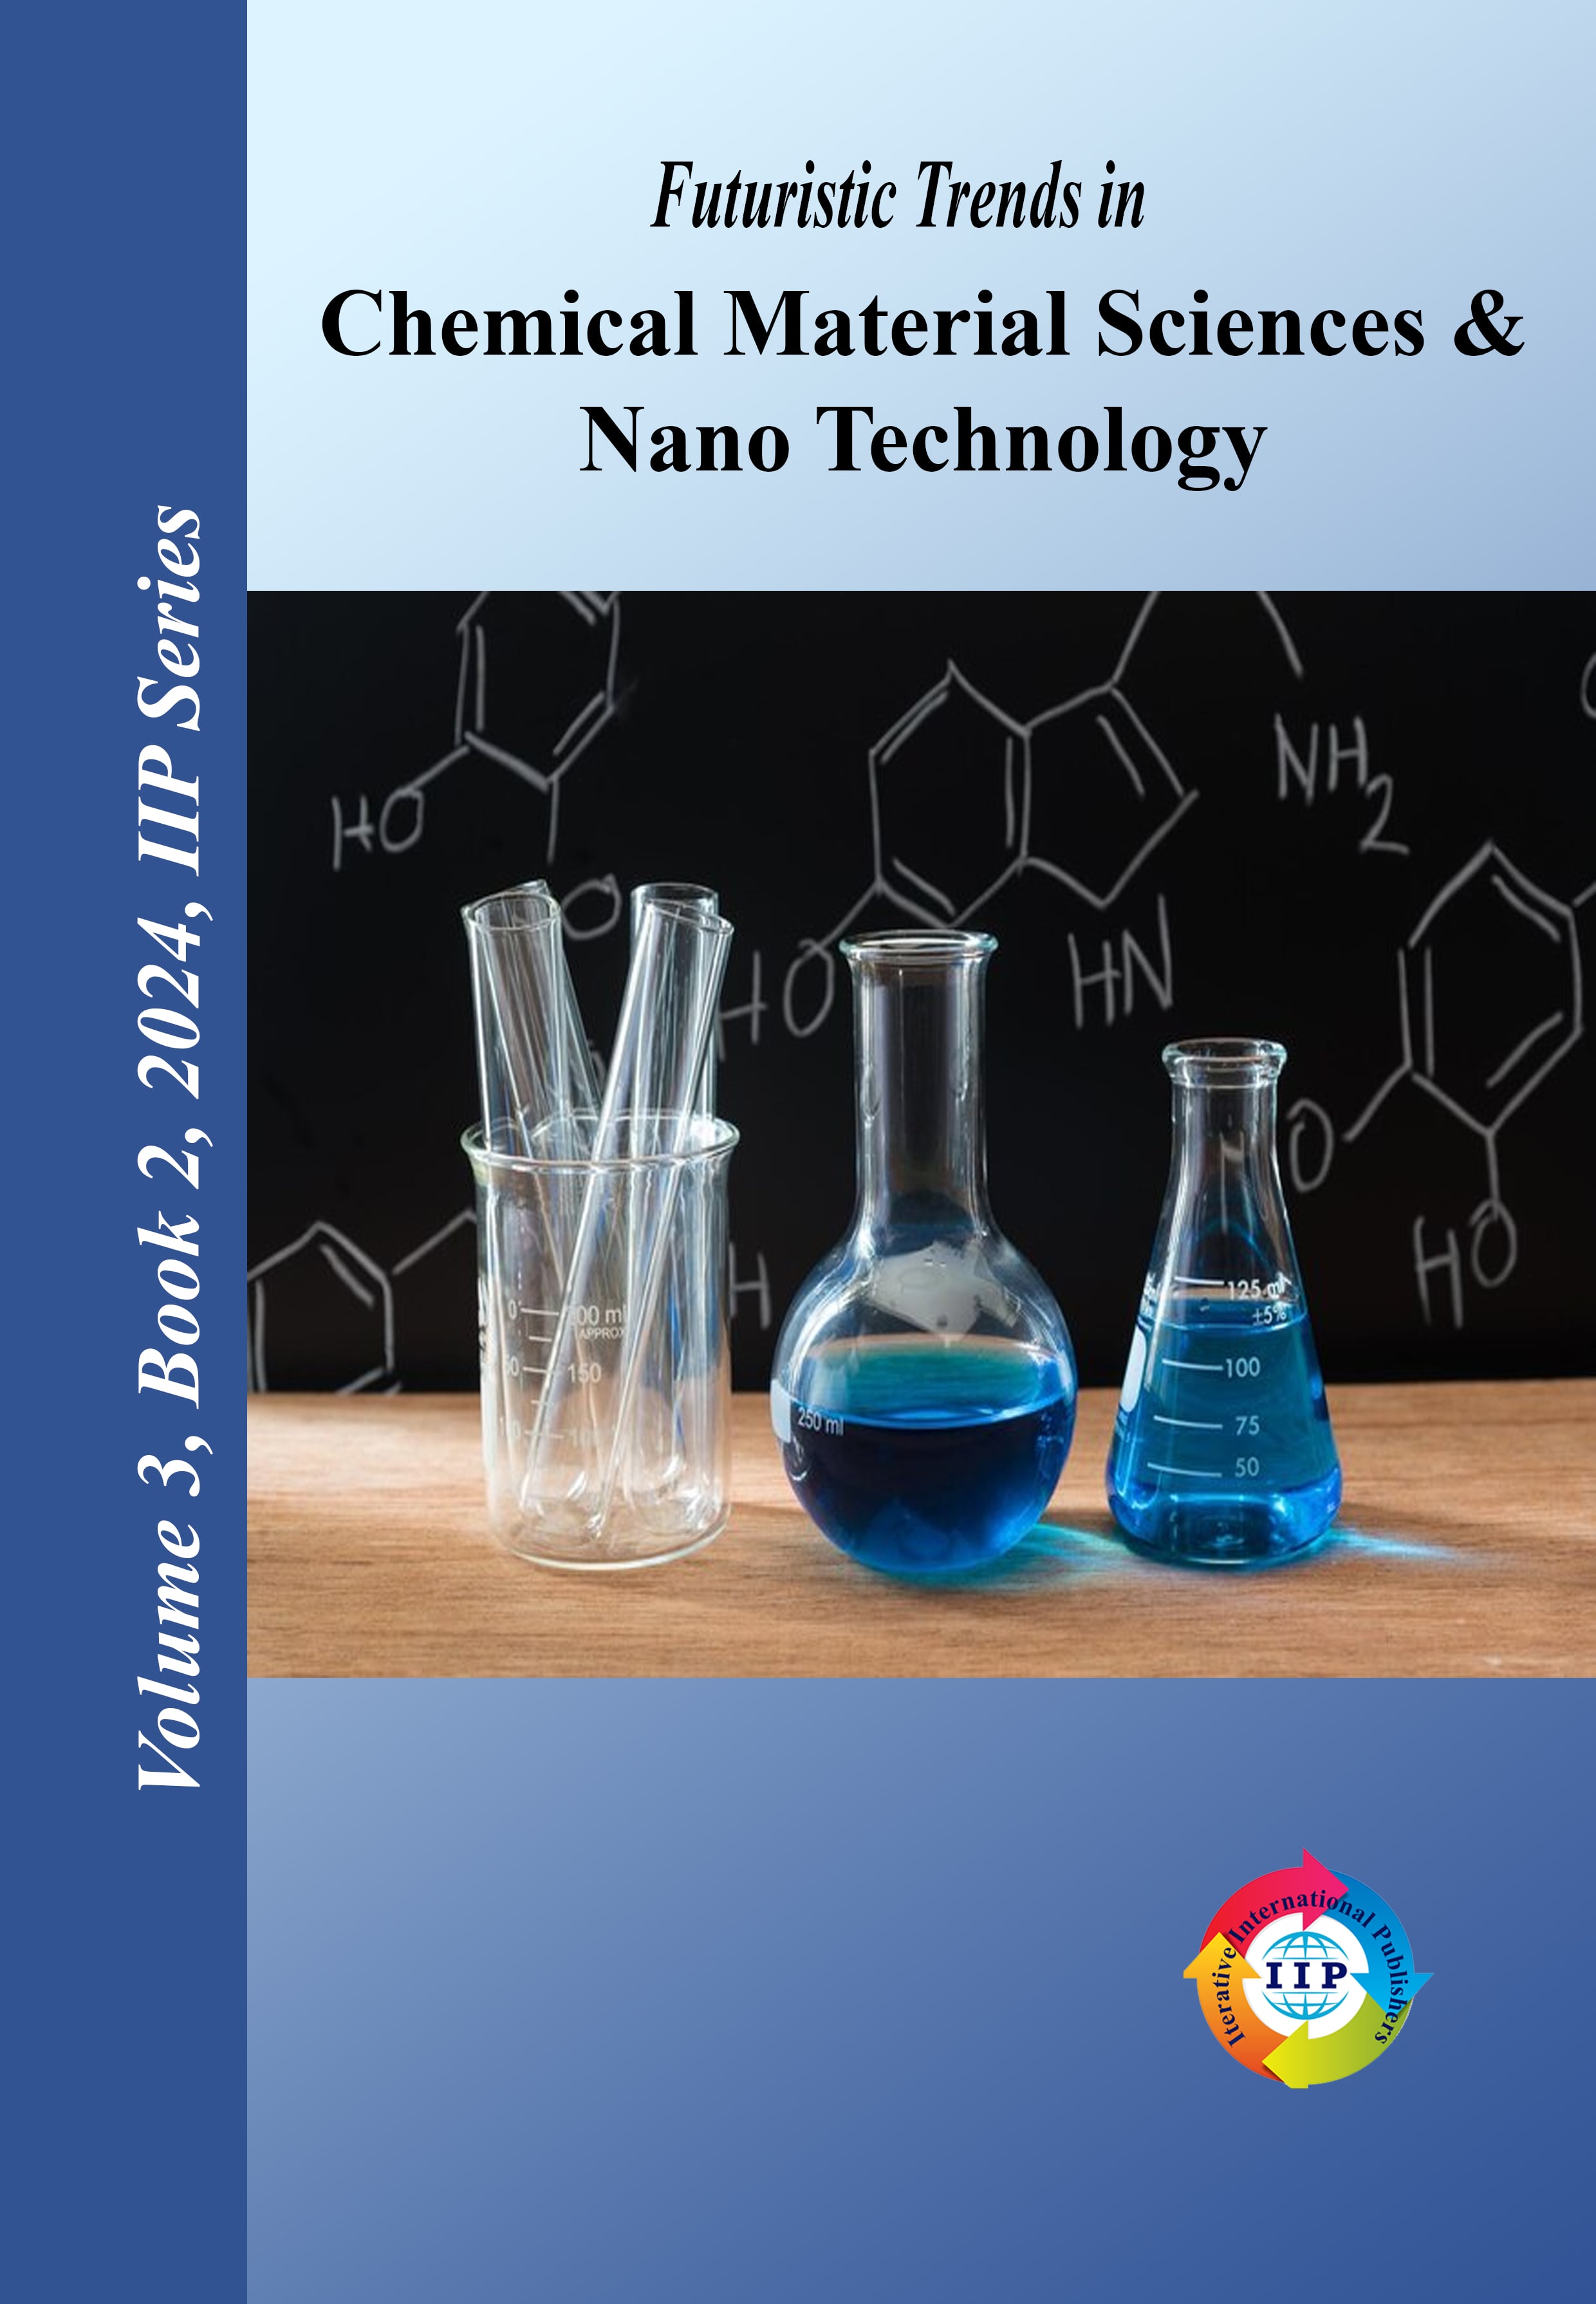 Futuristic Trends in Chemical Material Sciences & Nano Technology  Volume 3 Book 2